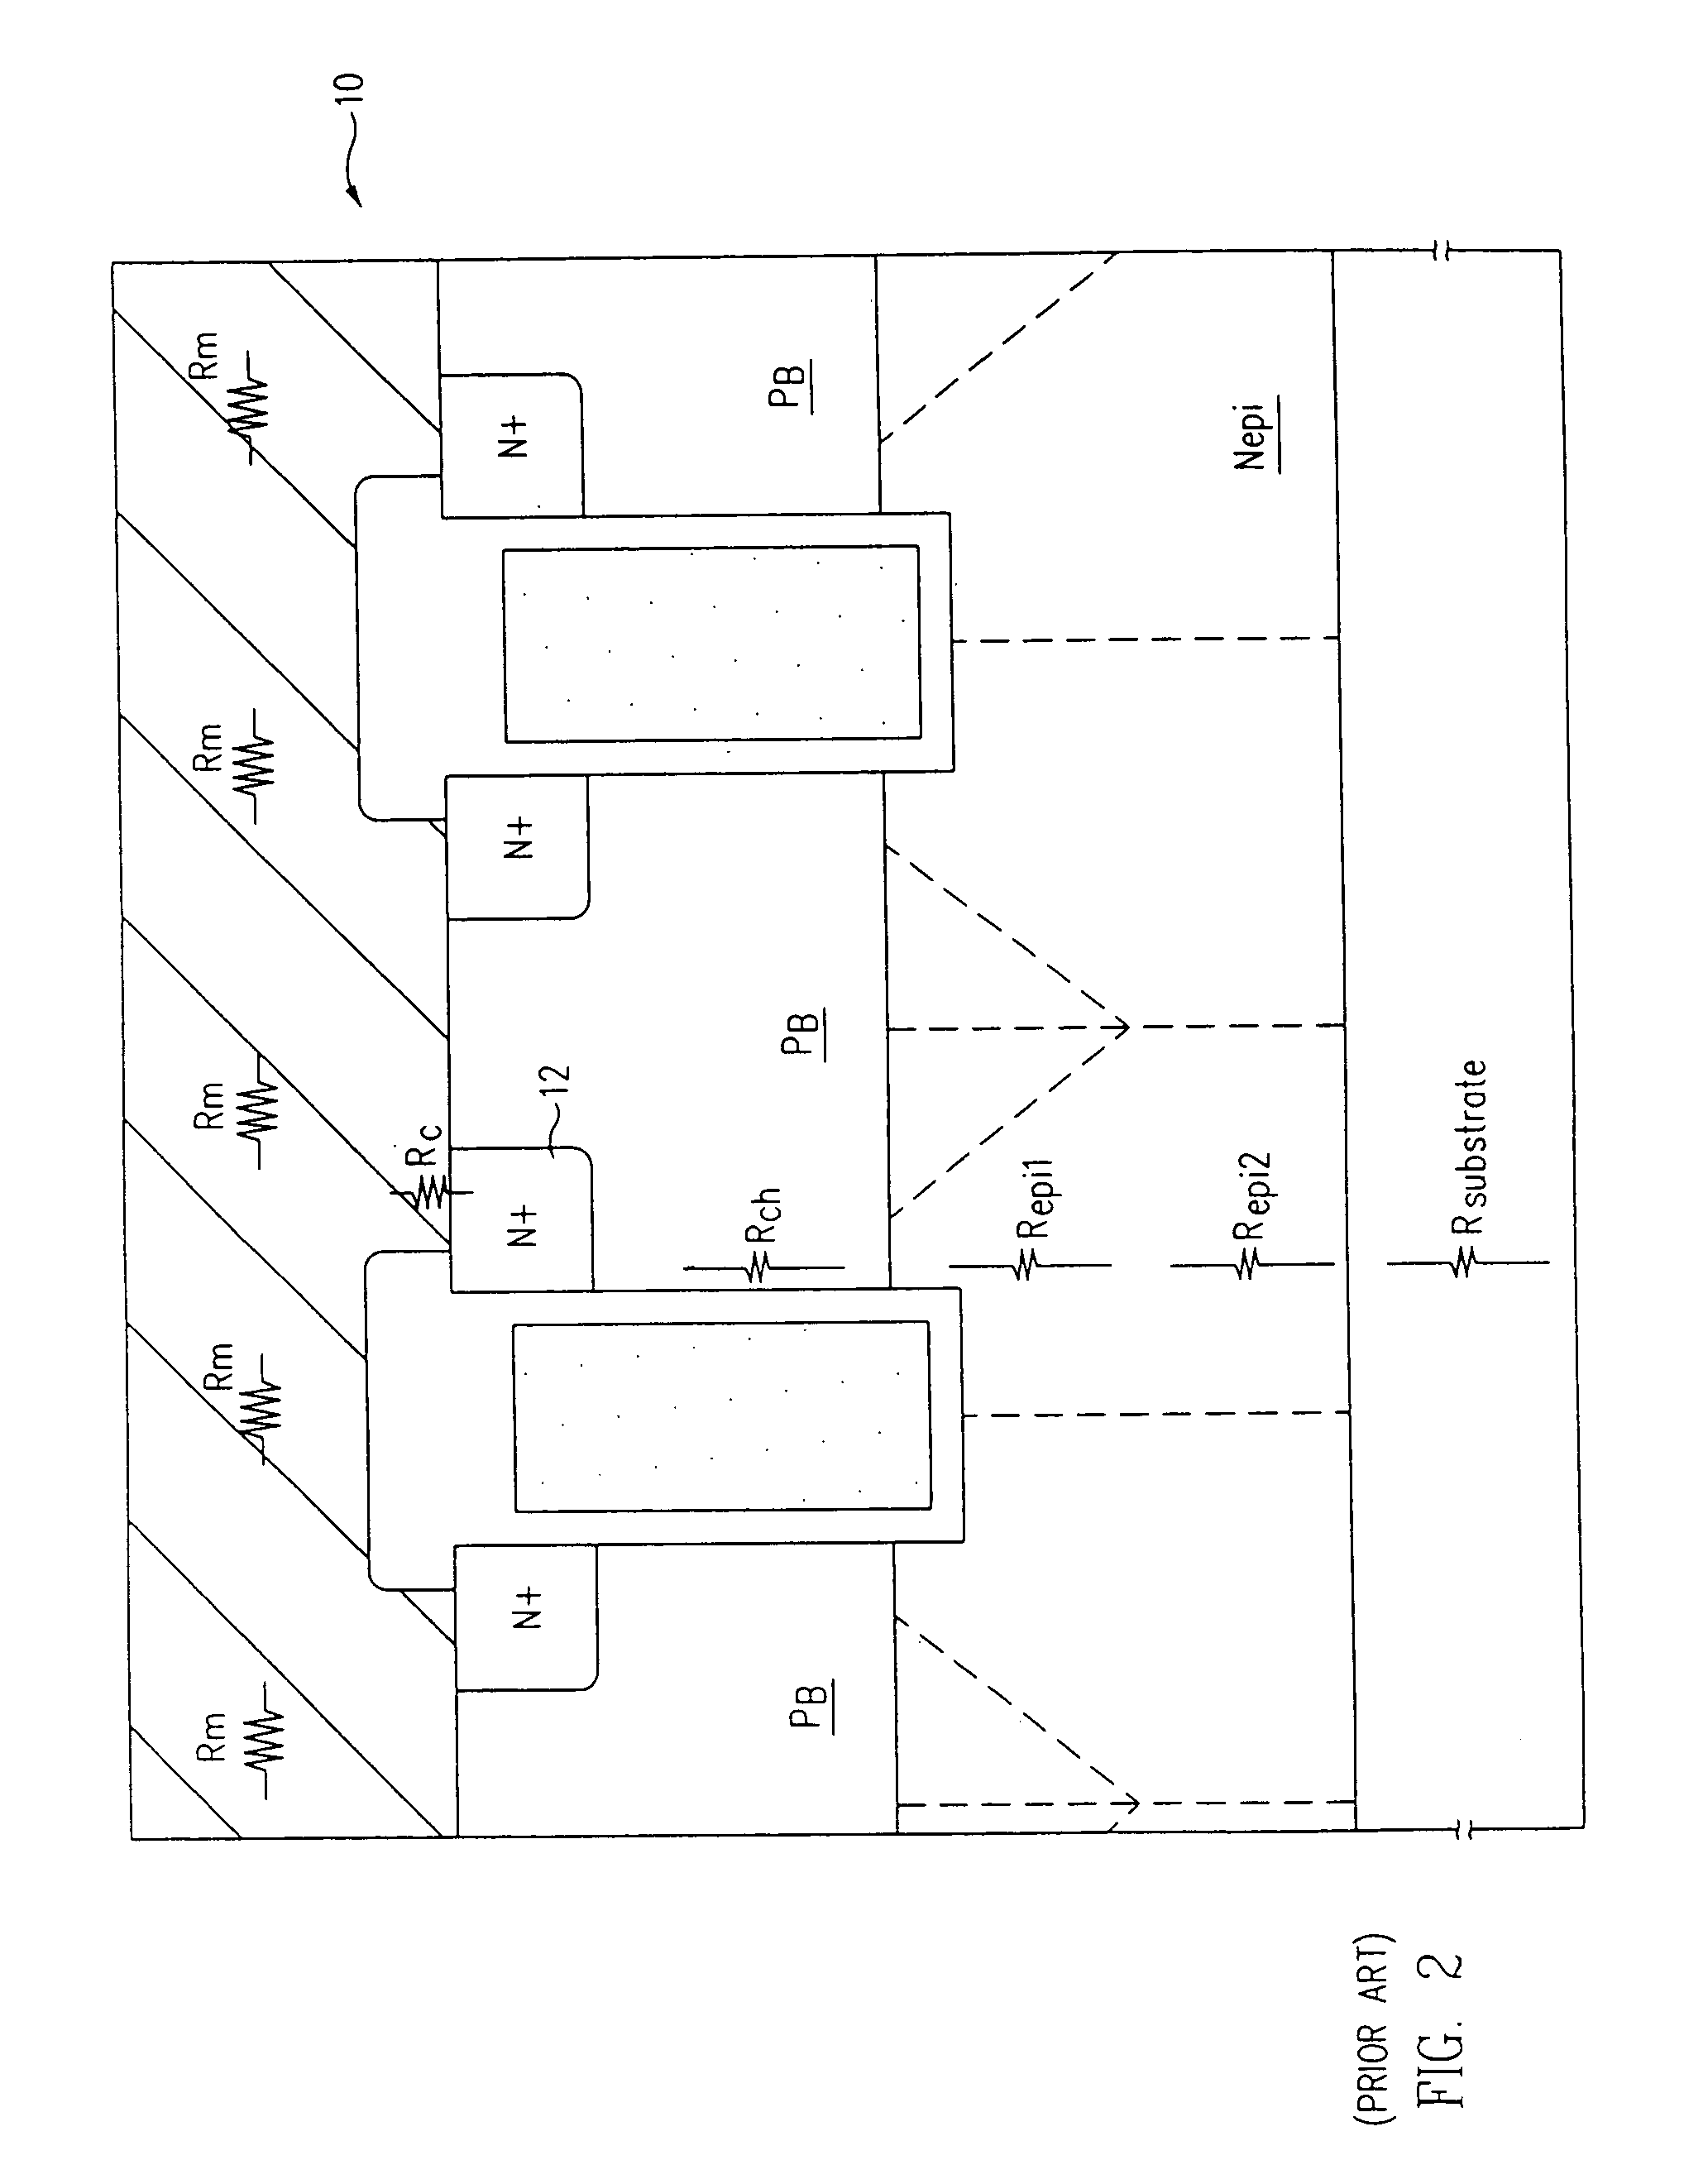 Method of forming trench transistor with chained implanted body including a plurality of implantation with different energies